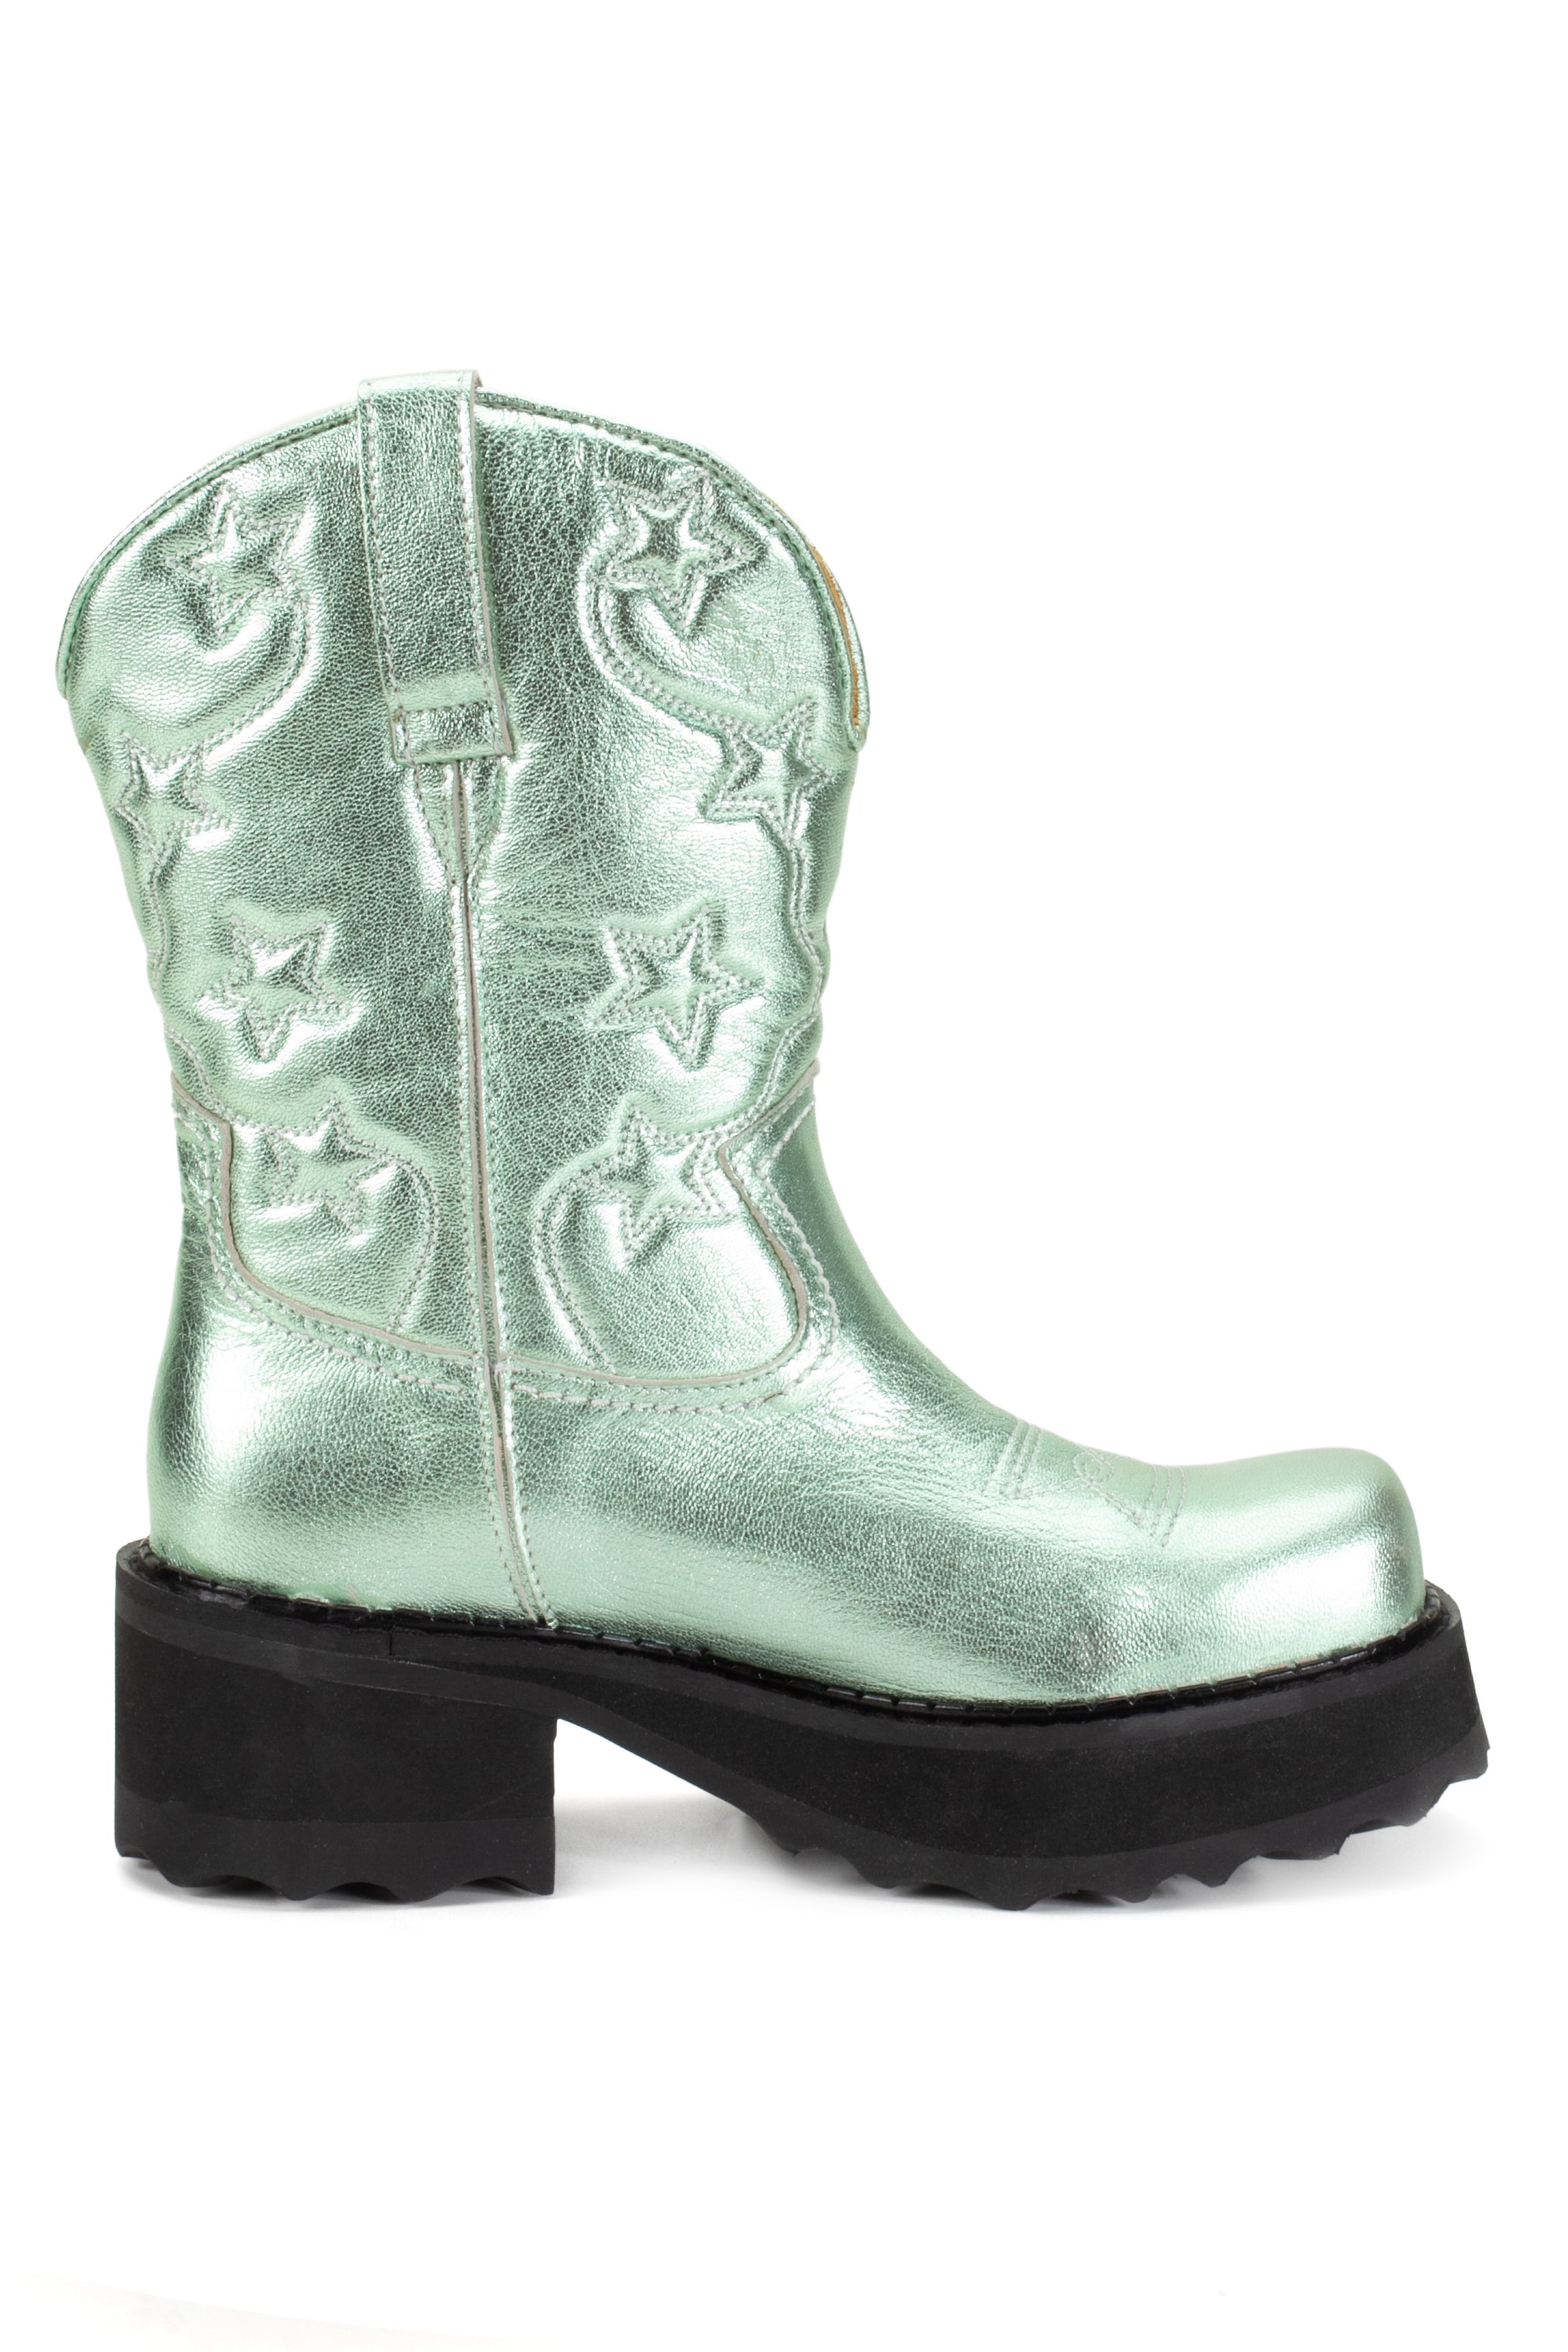 mid-size boots equipped with 2 handles to make them easy to wear, Western style look, engraved lone stars front and back 